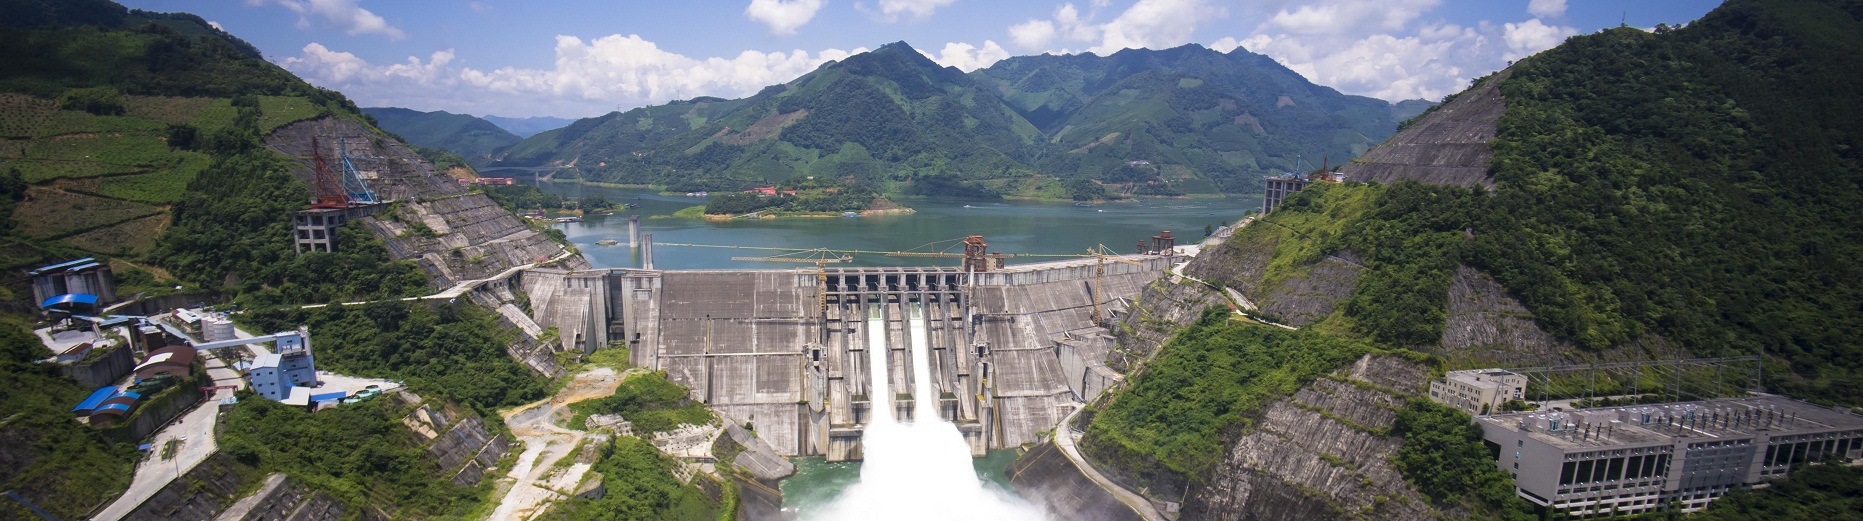 Longtan Hydropower produces 200b kWh of clean electricity